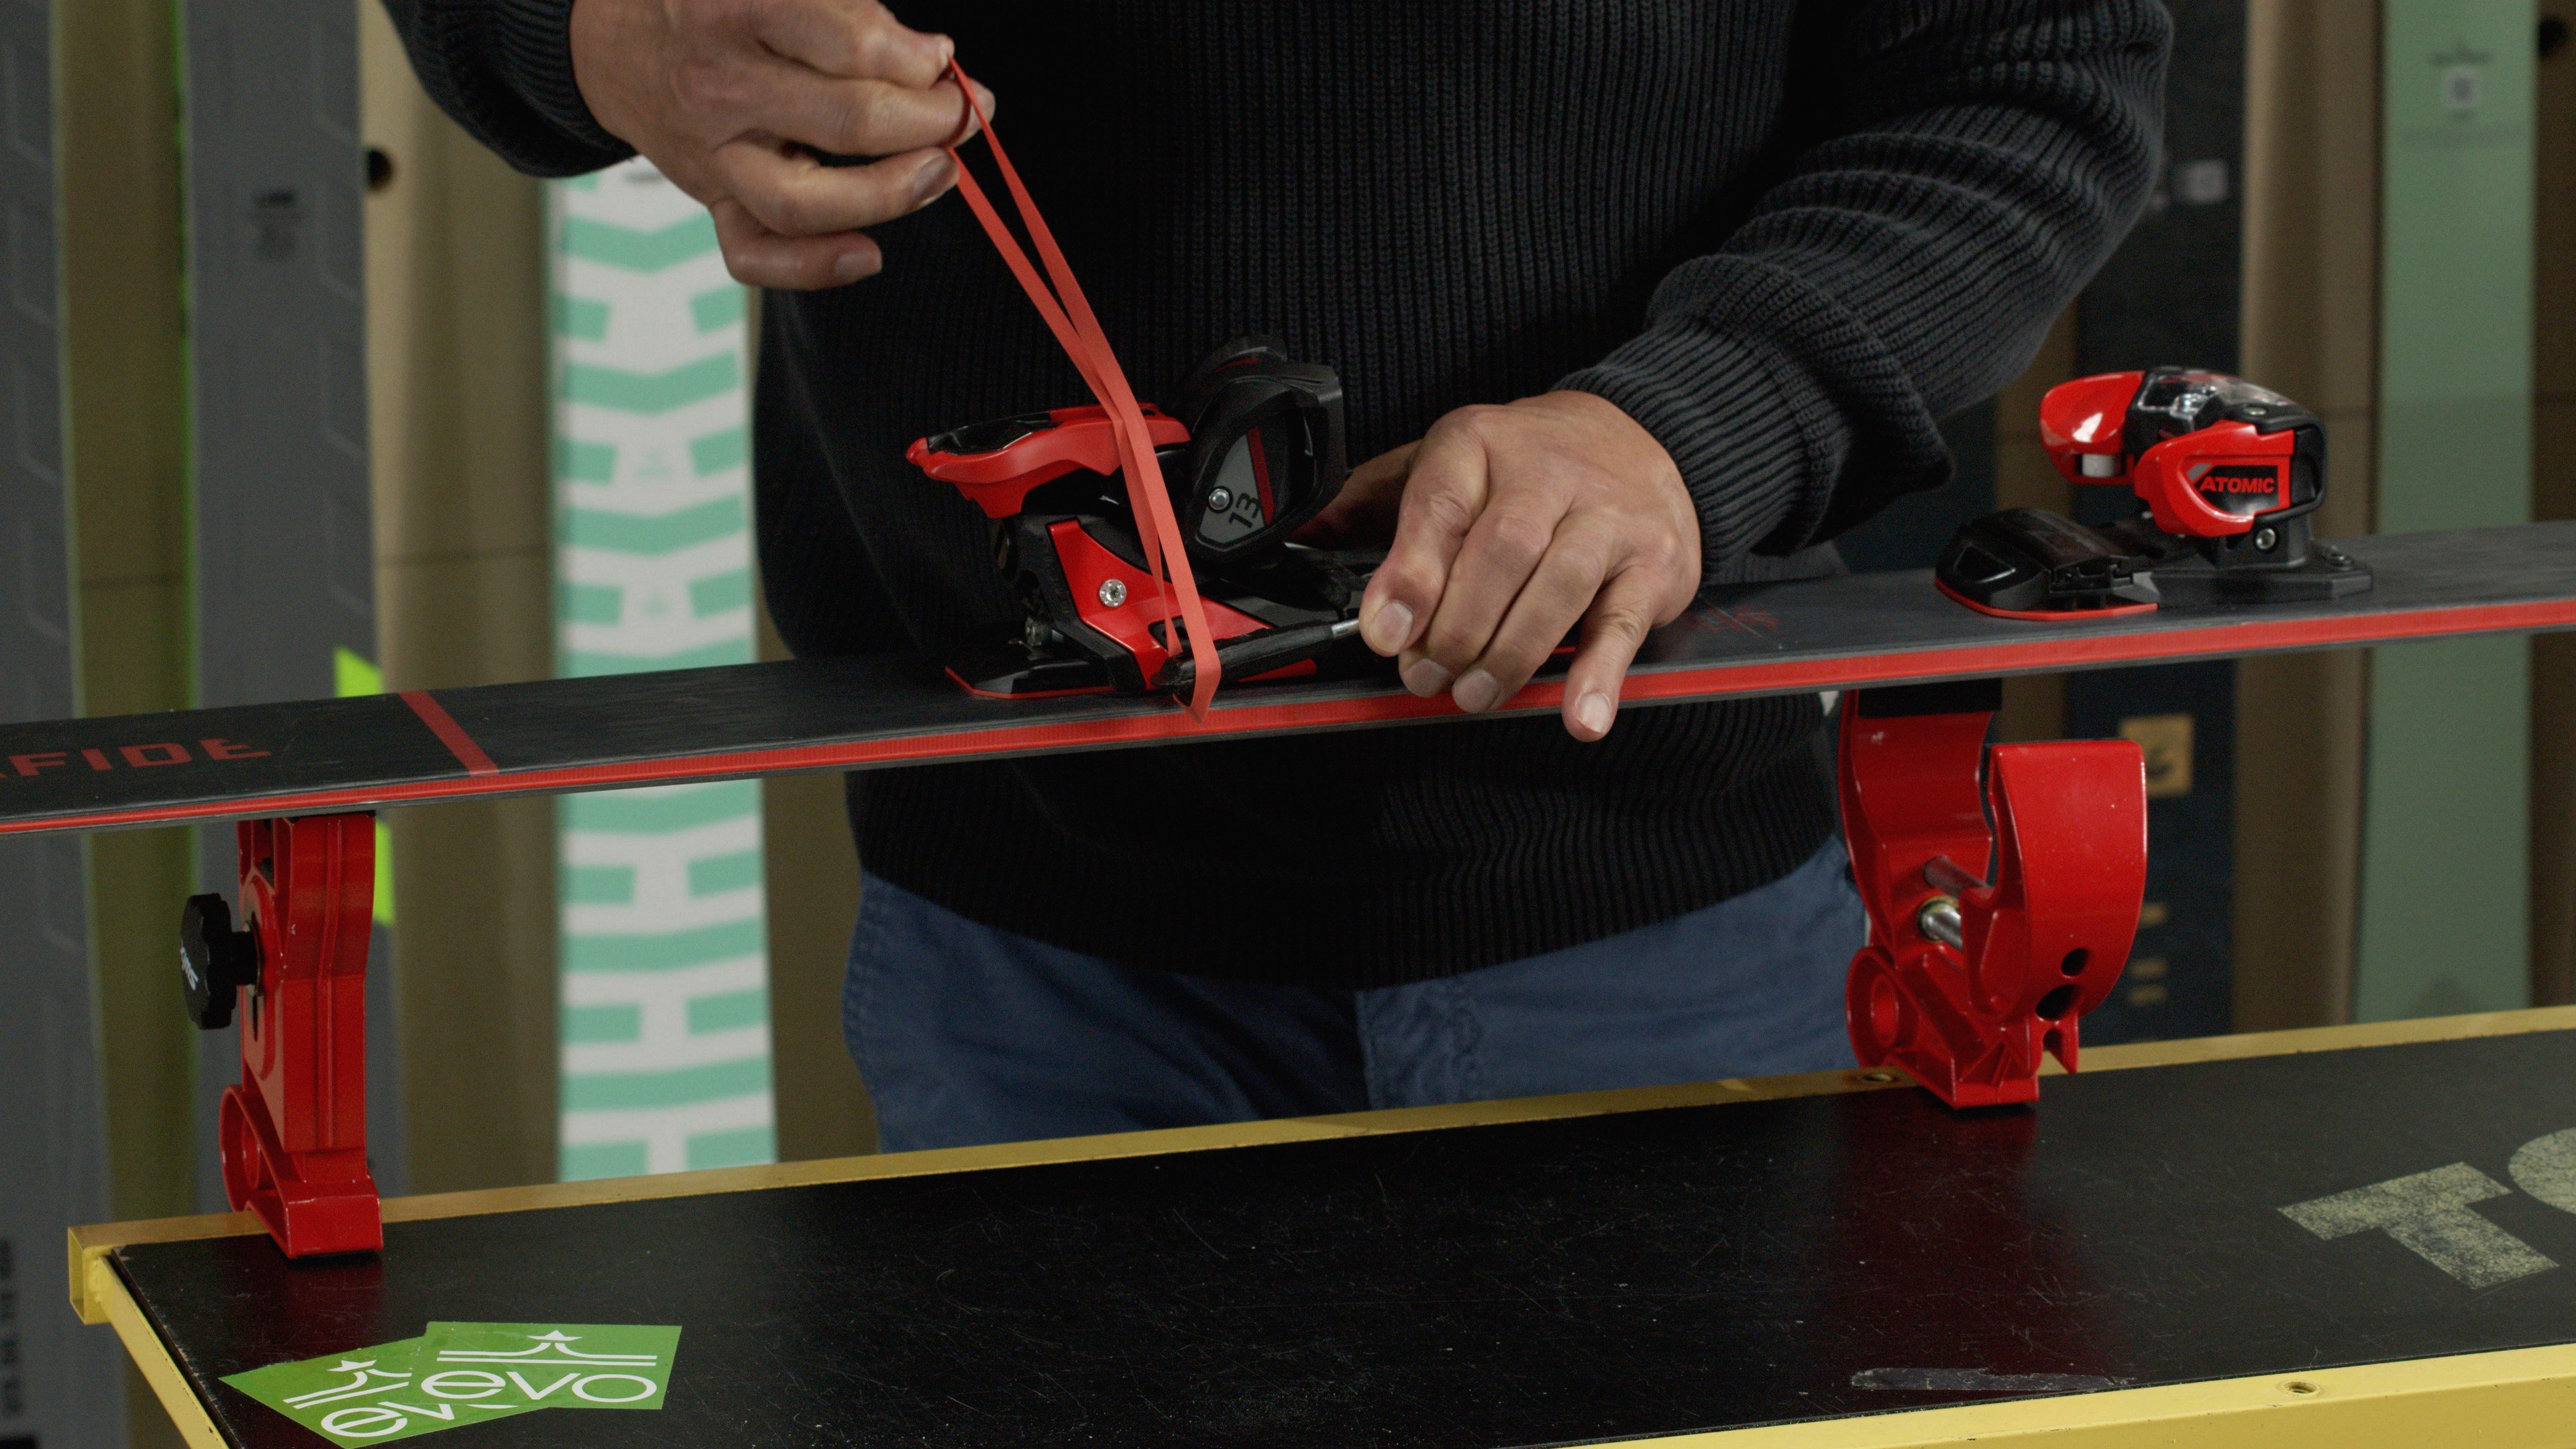 How To Wax a Snowboard & Skis